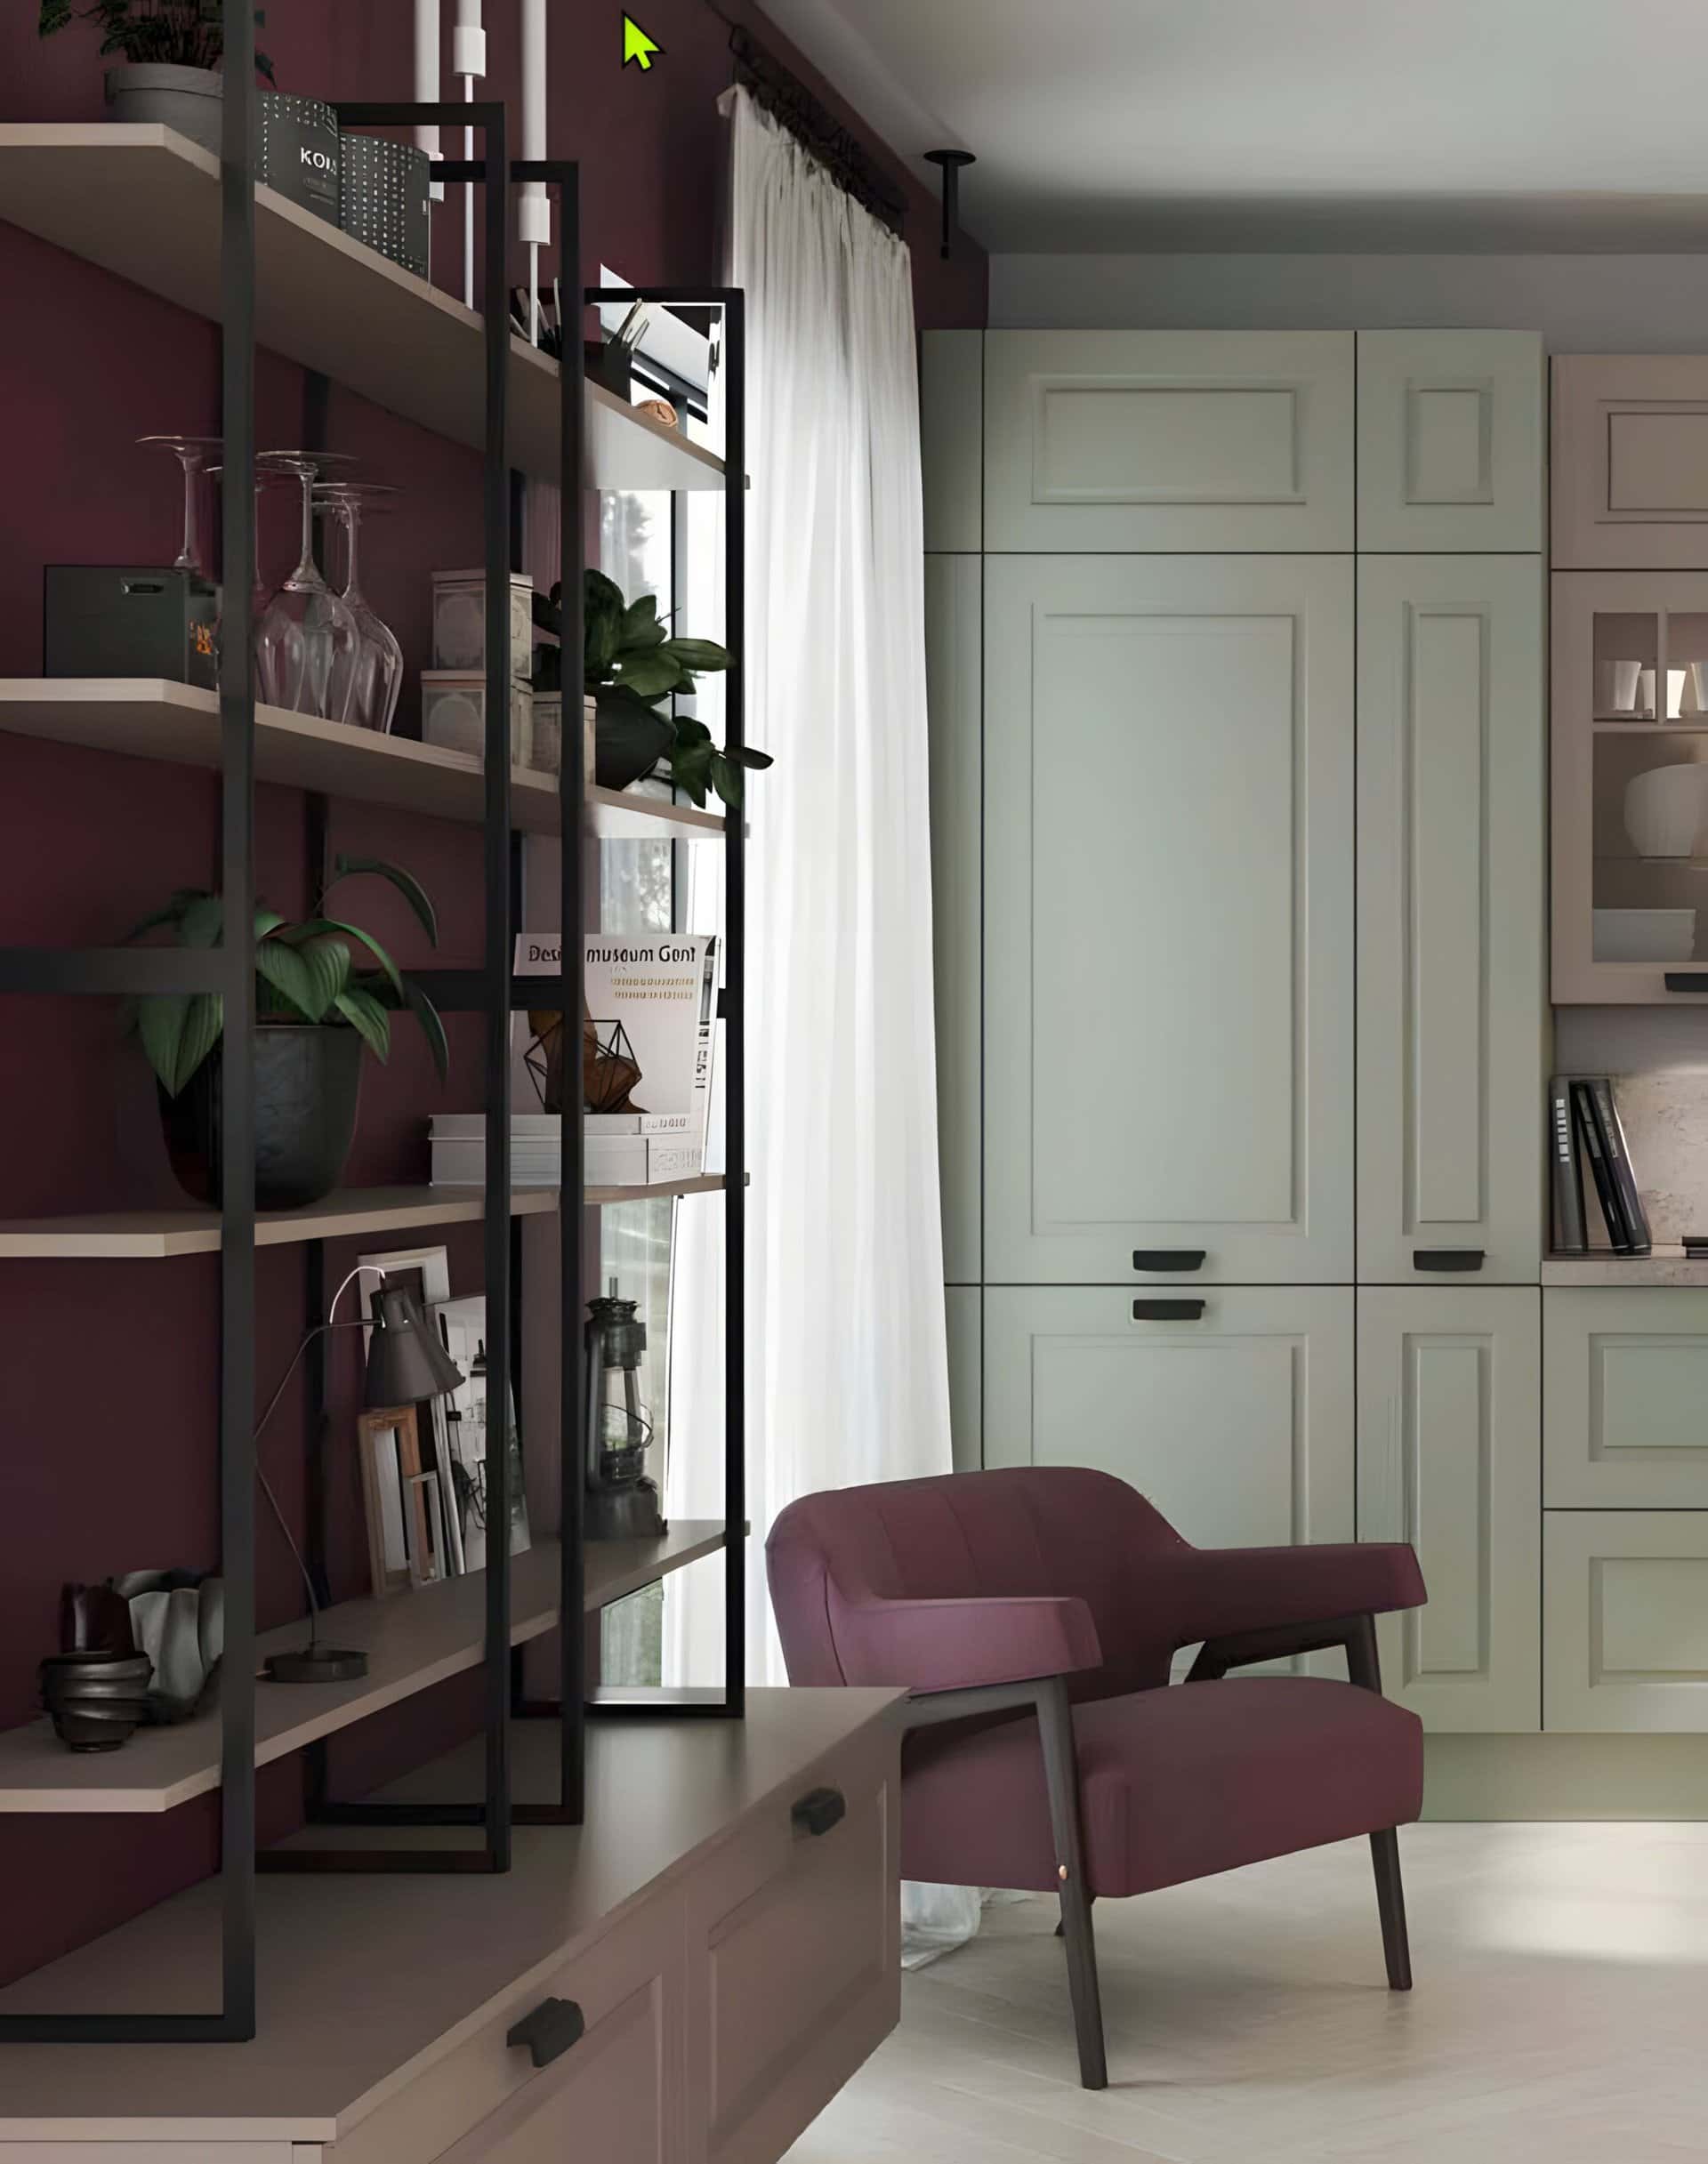 Elegant home office corner with a maroon bookshelf, German kitchen cabinets, and a plush chair by the window. Burger Lacquered series, German kitchen cabinets